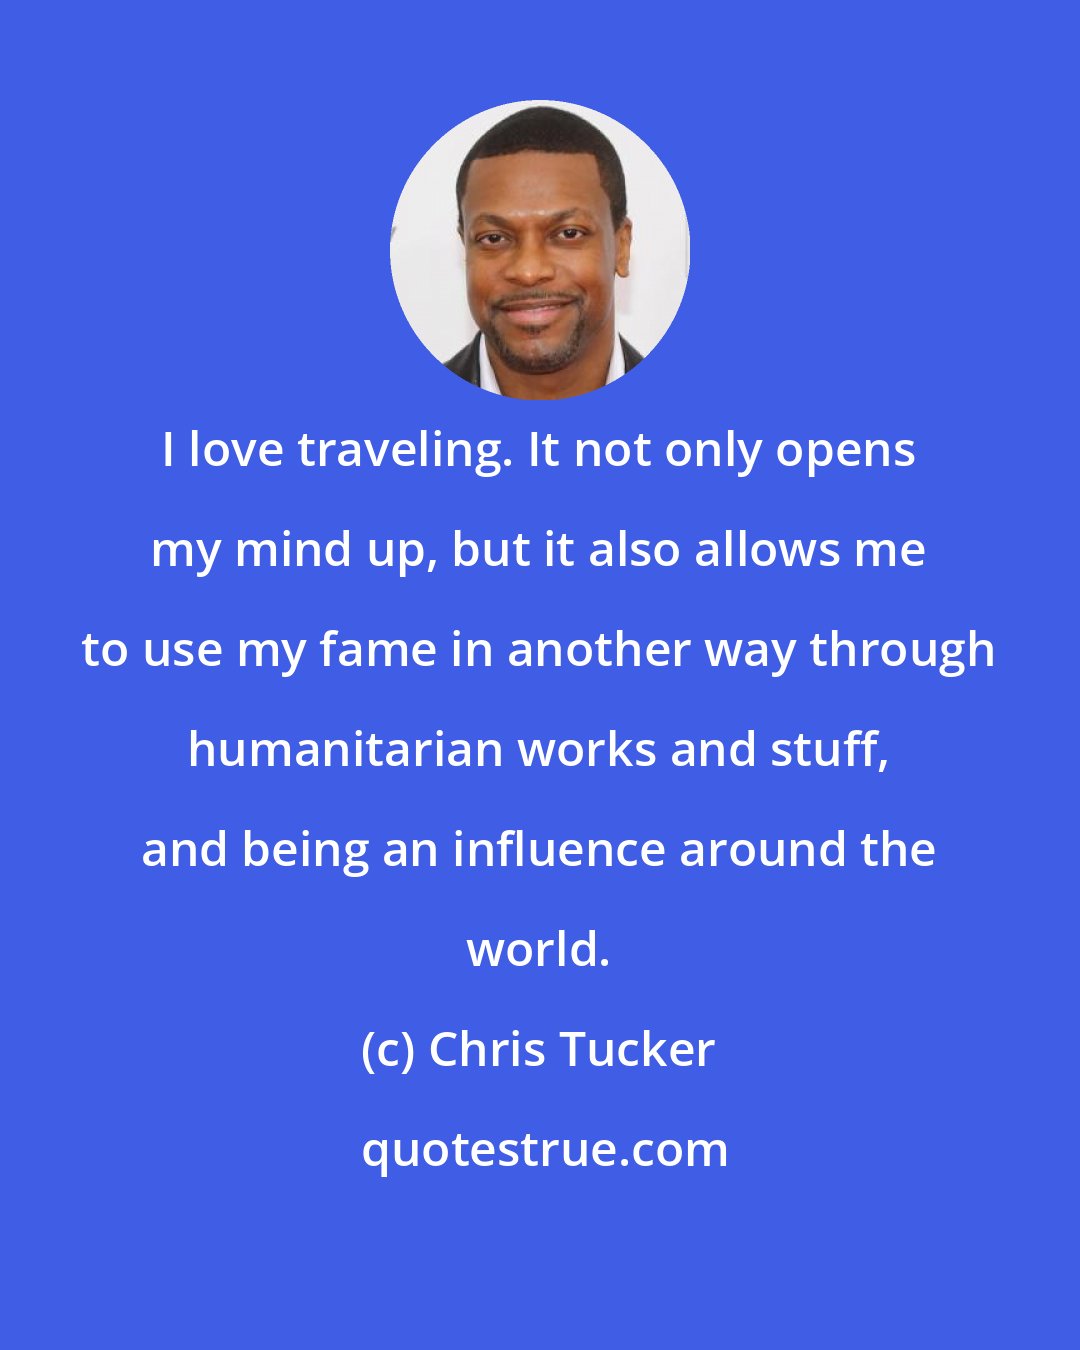 Chris Tucker: I love traveling. It not only opens my mind up, but it also allows me to use my fame in another way through humanitarian works and stuff, and being an influence around the world.